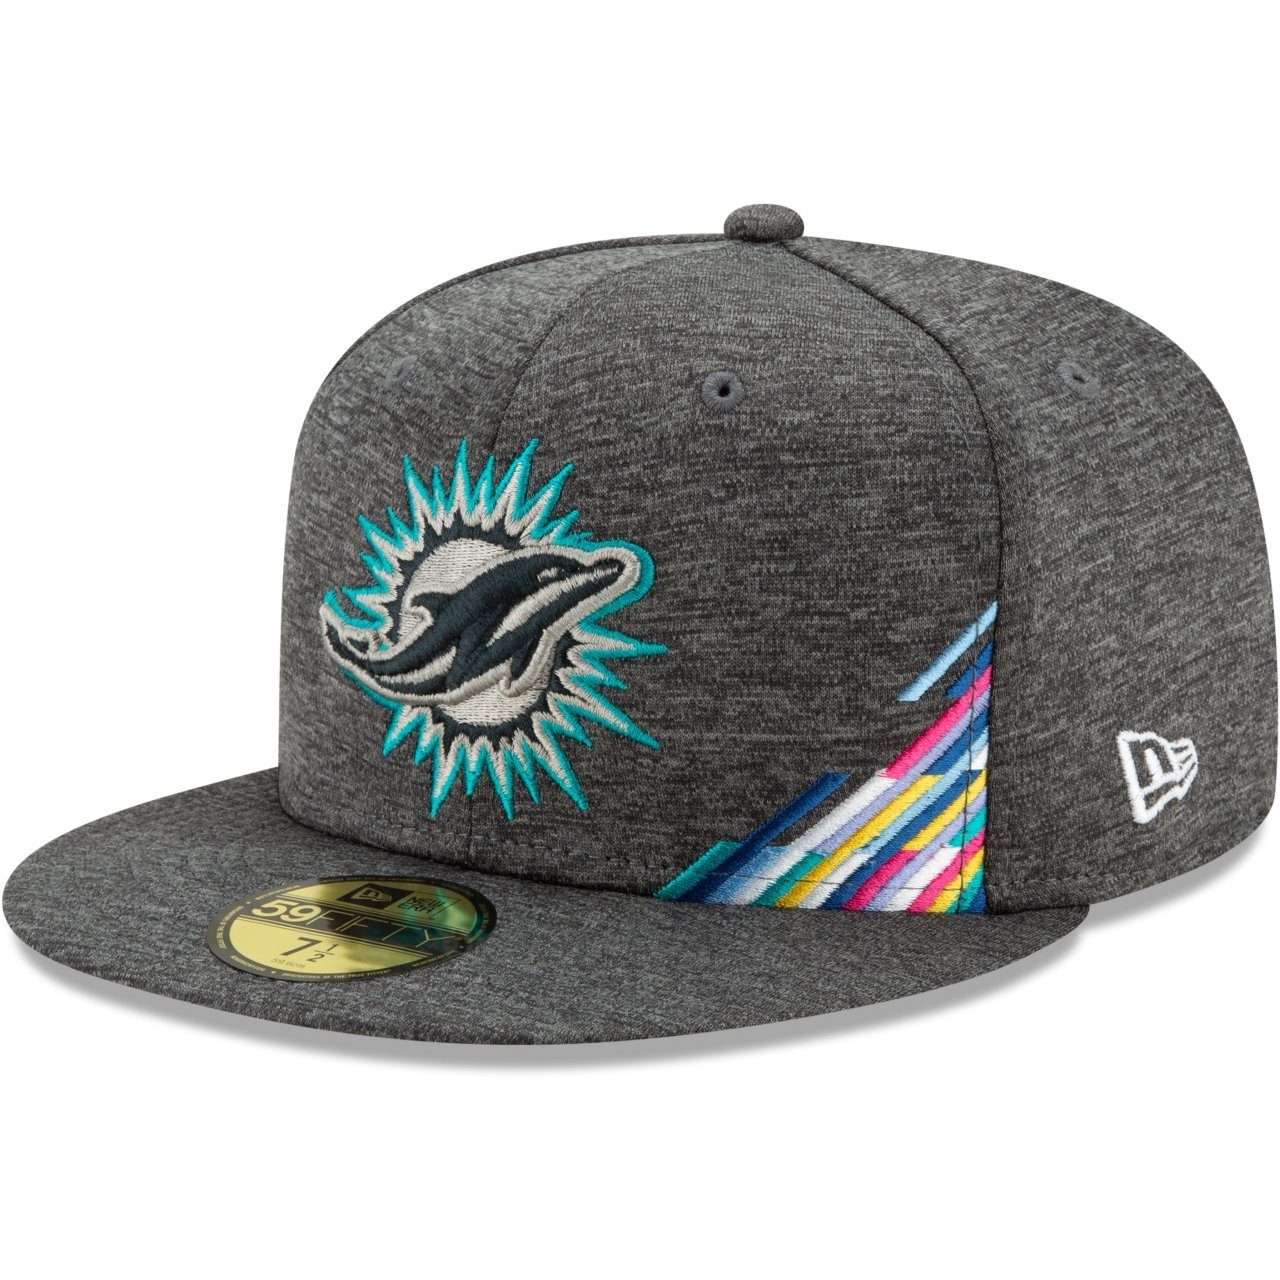 New Era Fitted Cap 59Fifty CRUCIAL CATCH NFL Teams Miami Dolphins